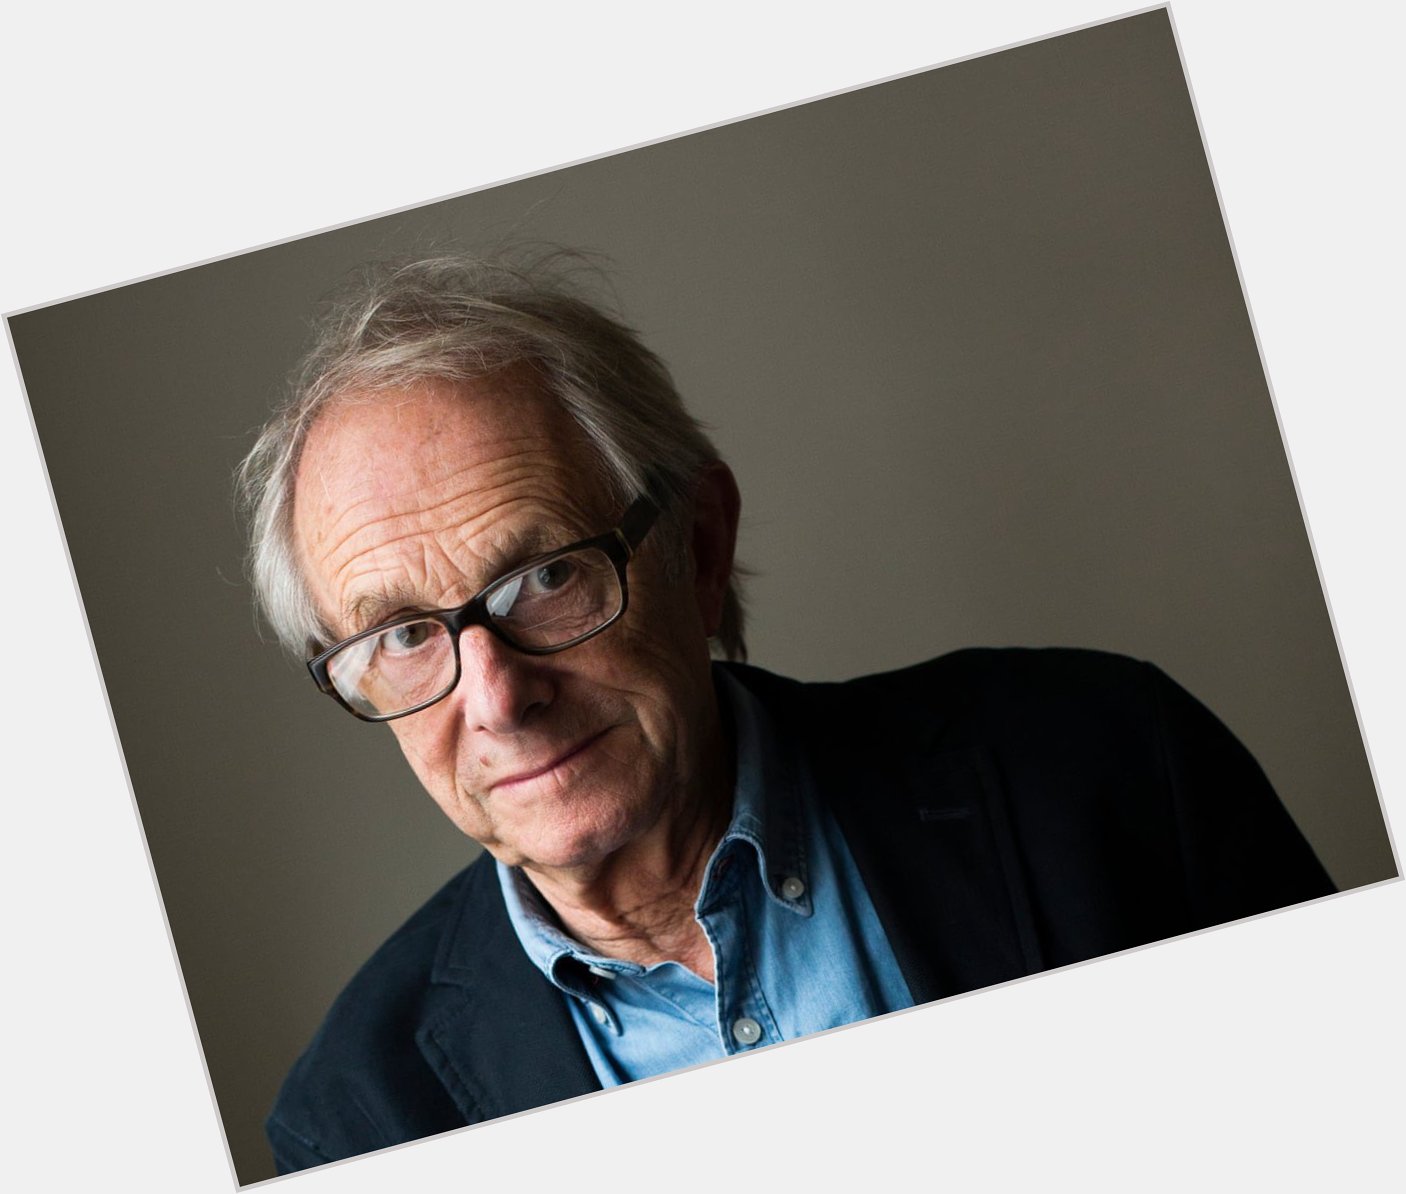 Happy Birthday Ken Loach 87 today - one of our finest ever film makers  